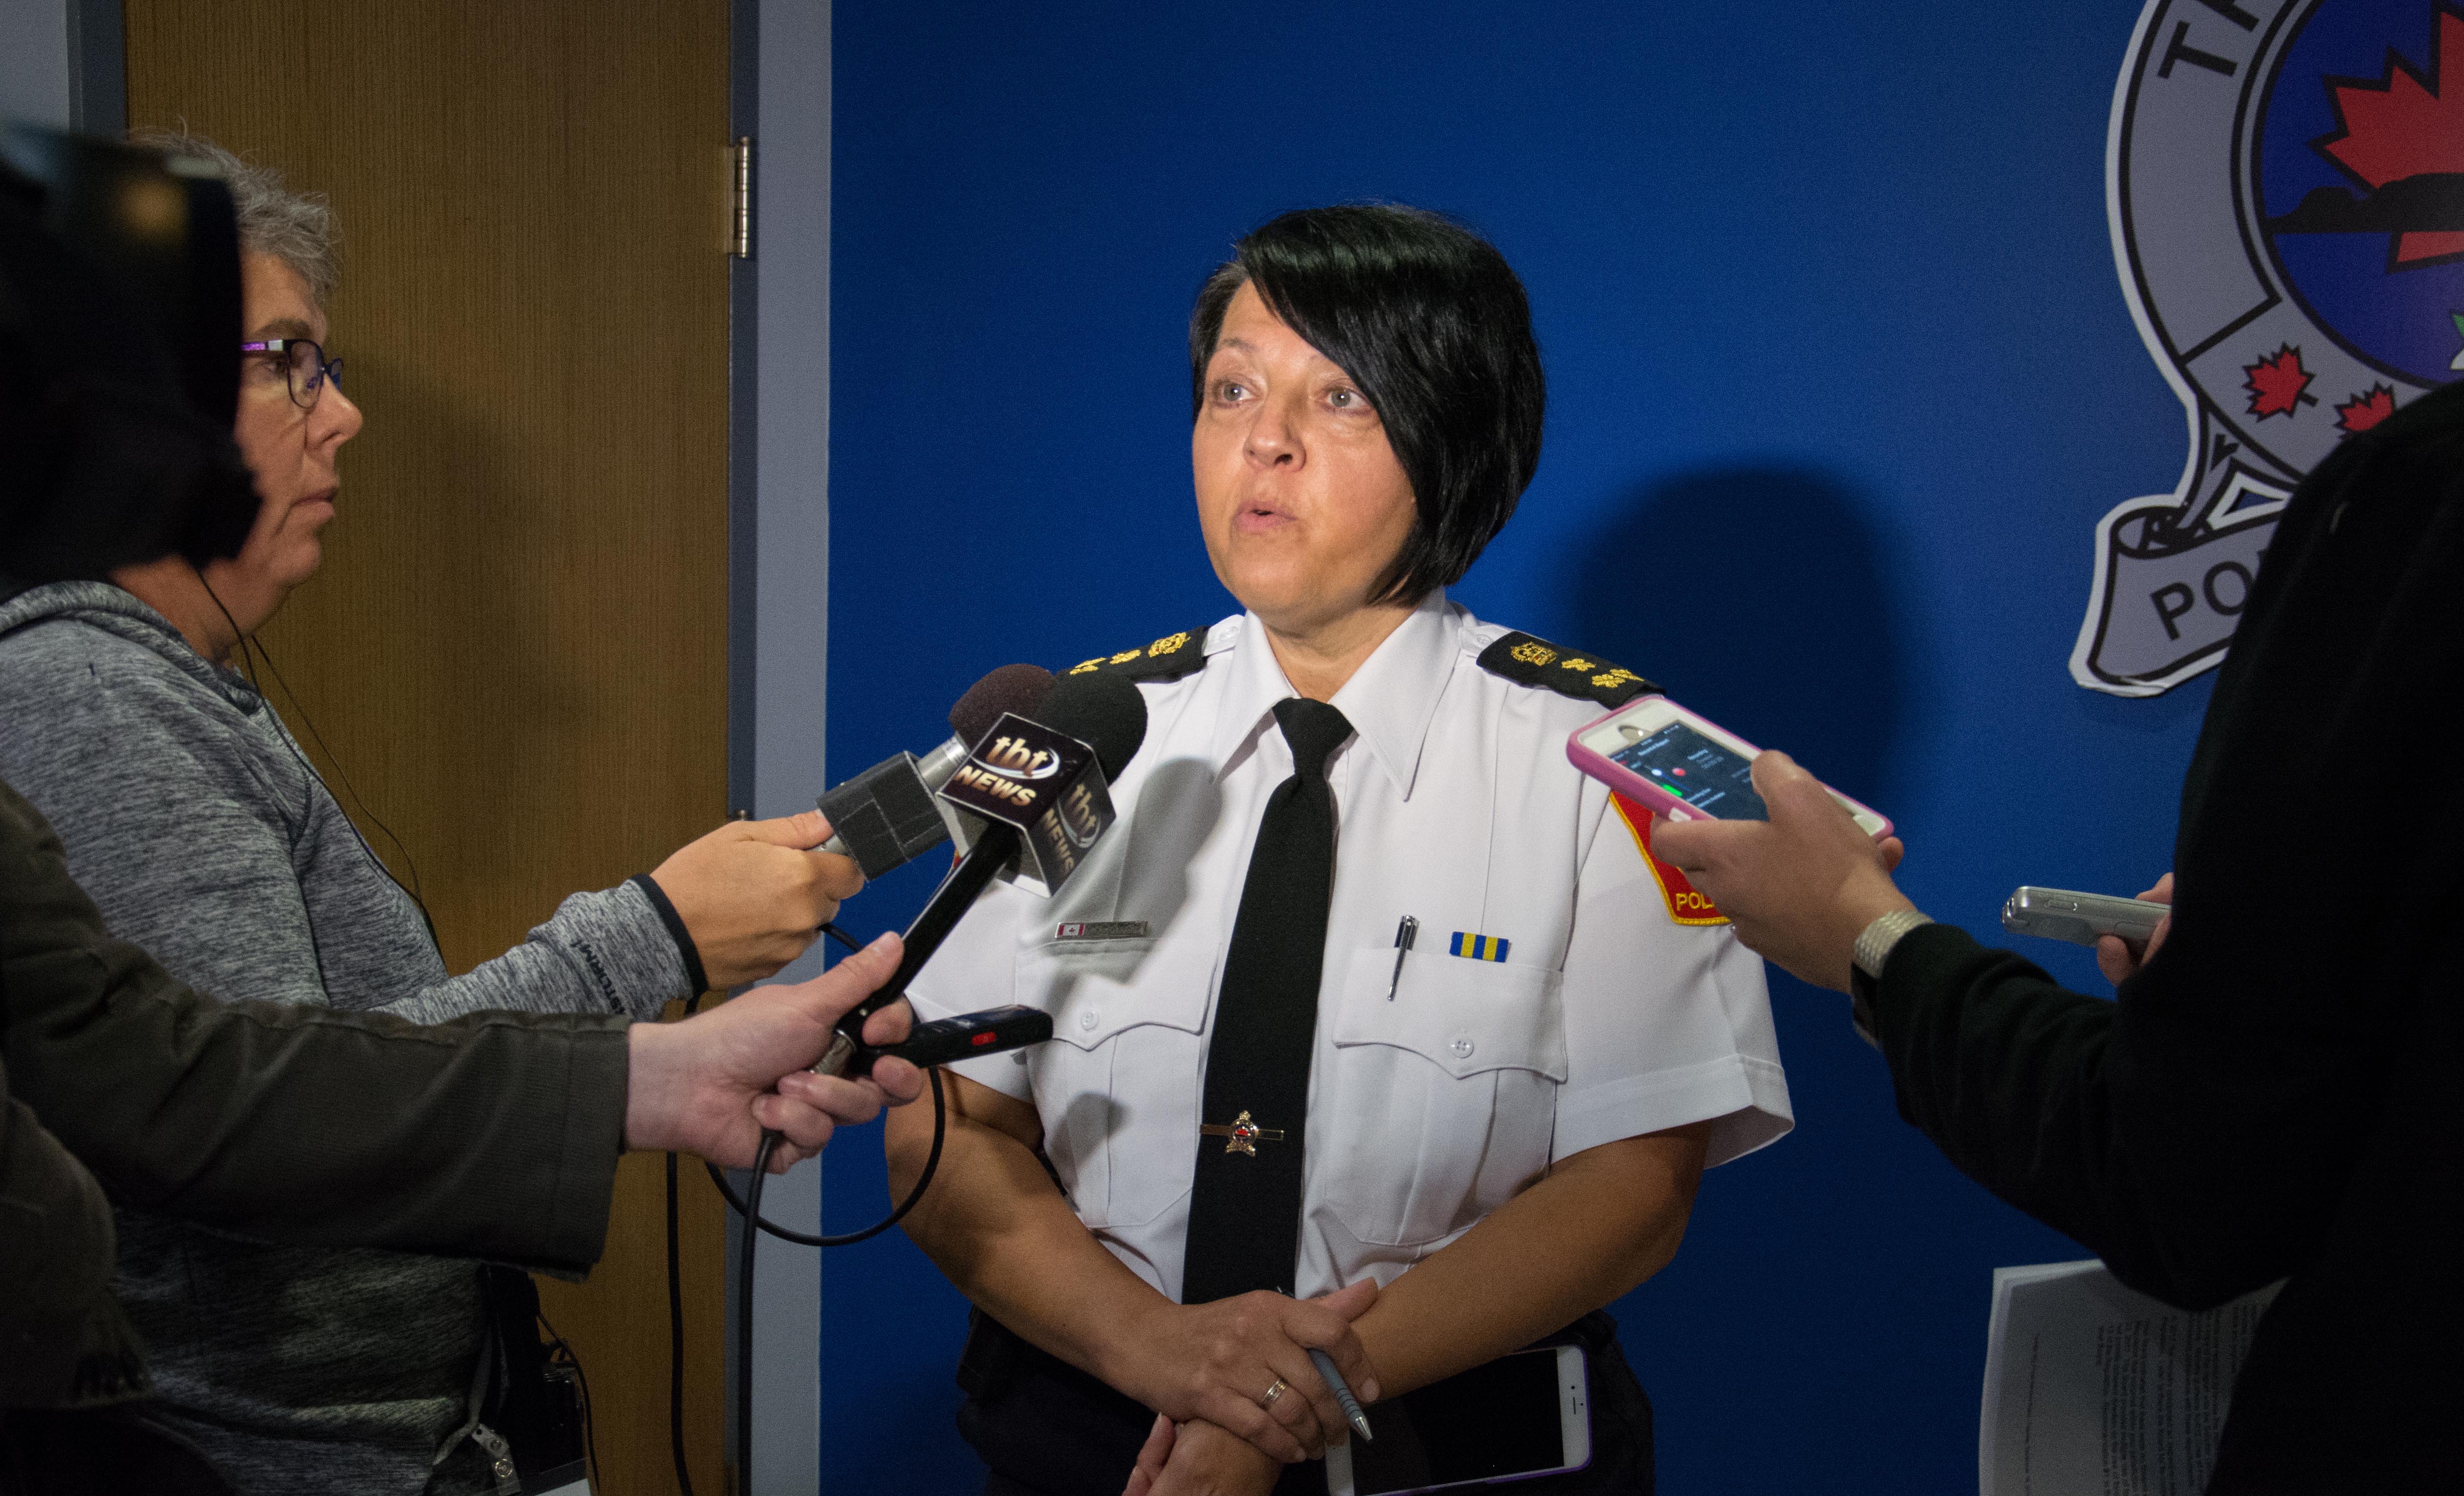 TBPS seeks provincial support in fight against southern Ontario gangs